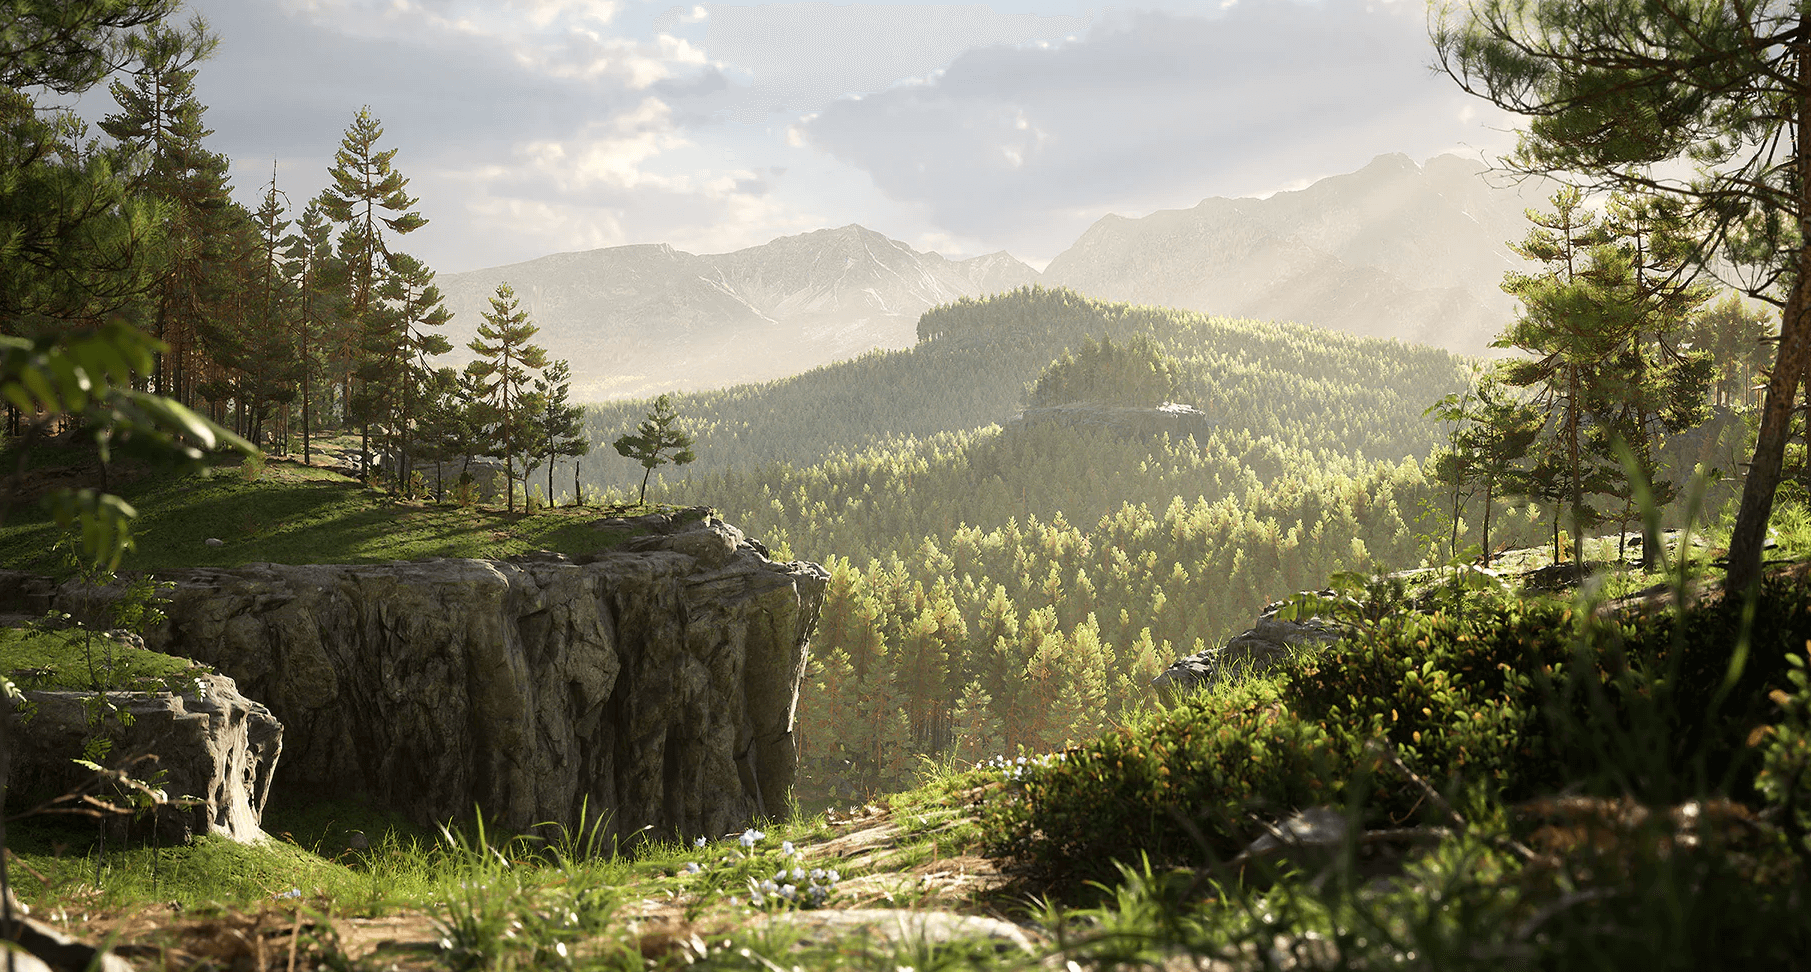 【UE4/5】苏格兰松林生物群落 – RB – RealBiomes Scots Pine Forest Biome – Trees, Landscape, Pine Forest, Grass